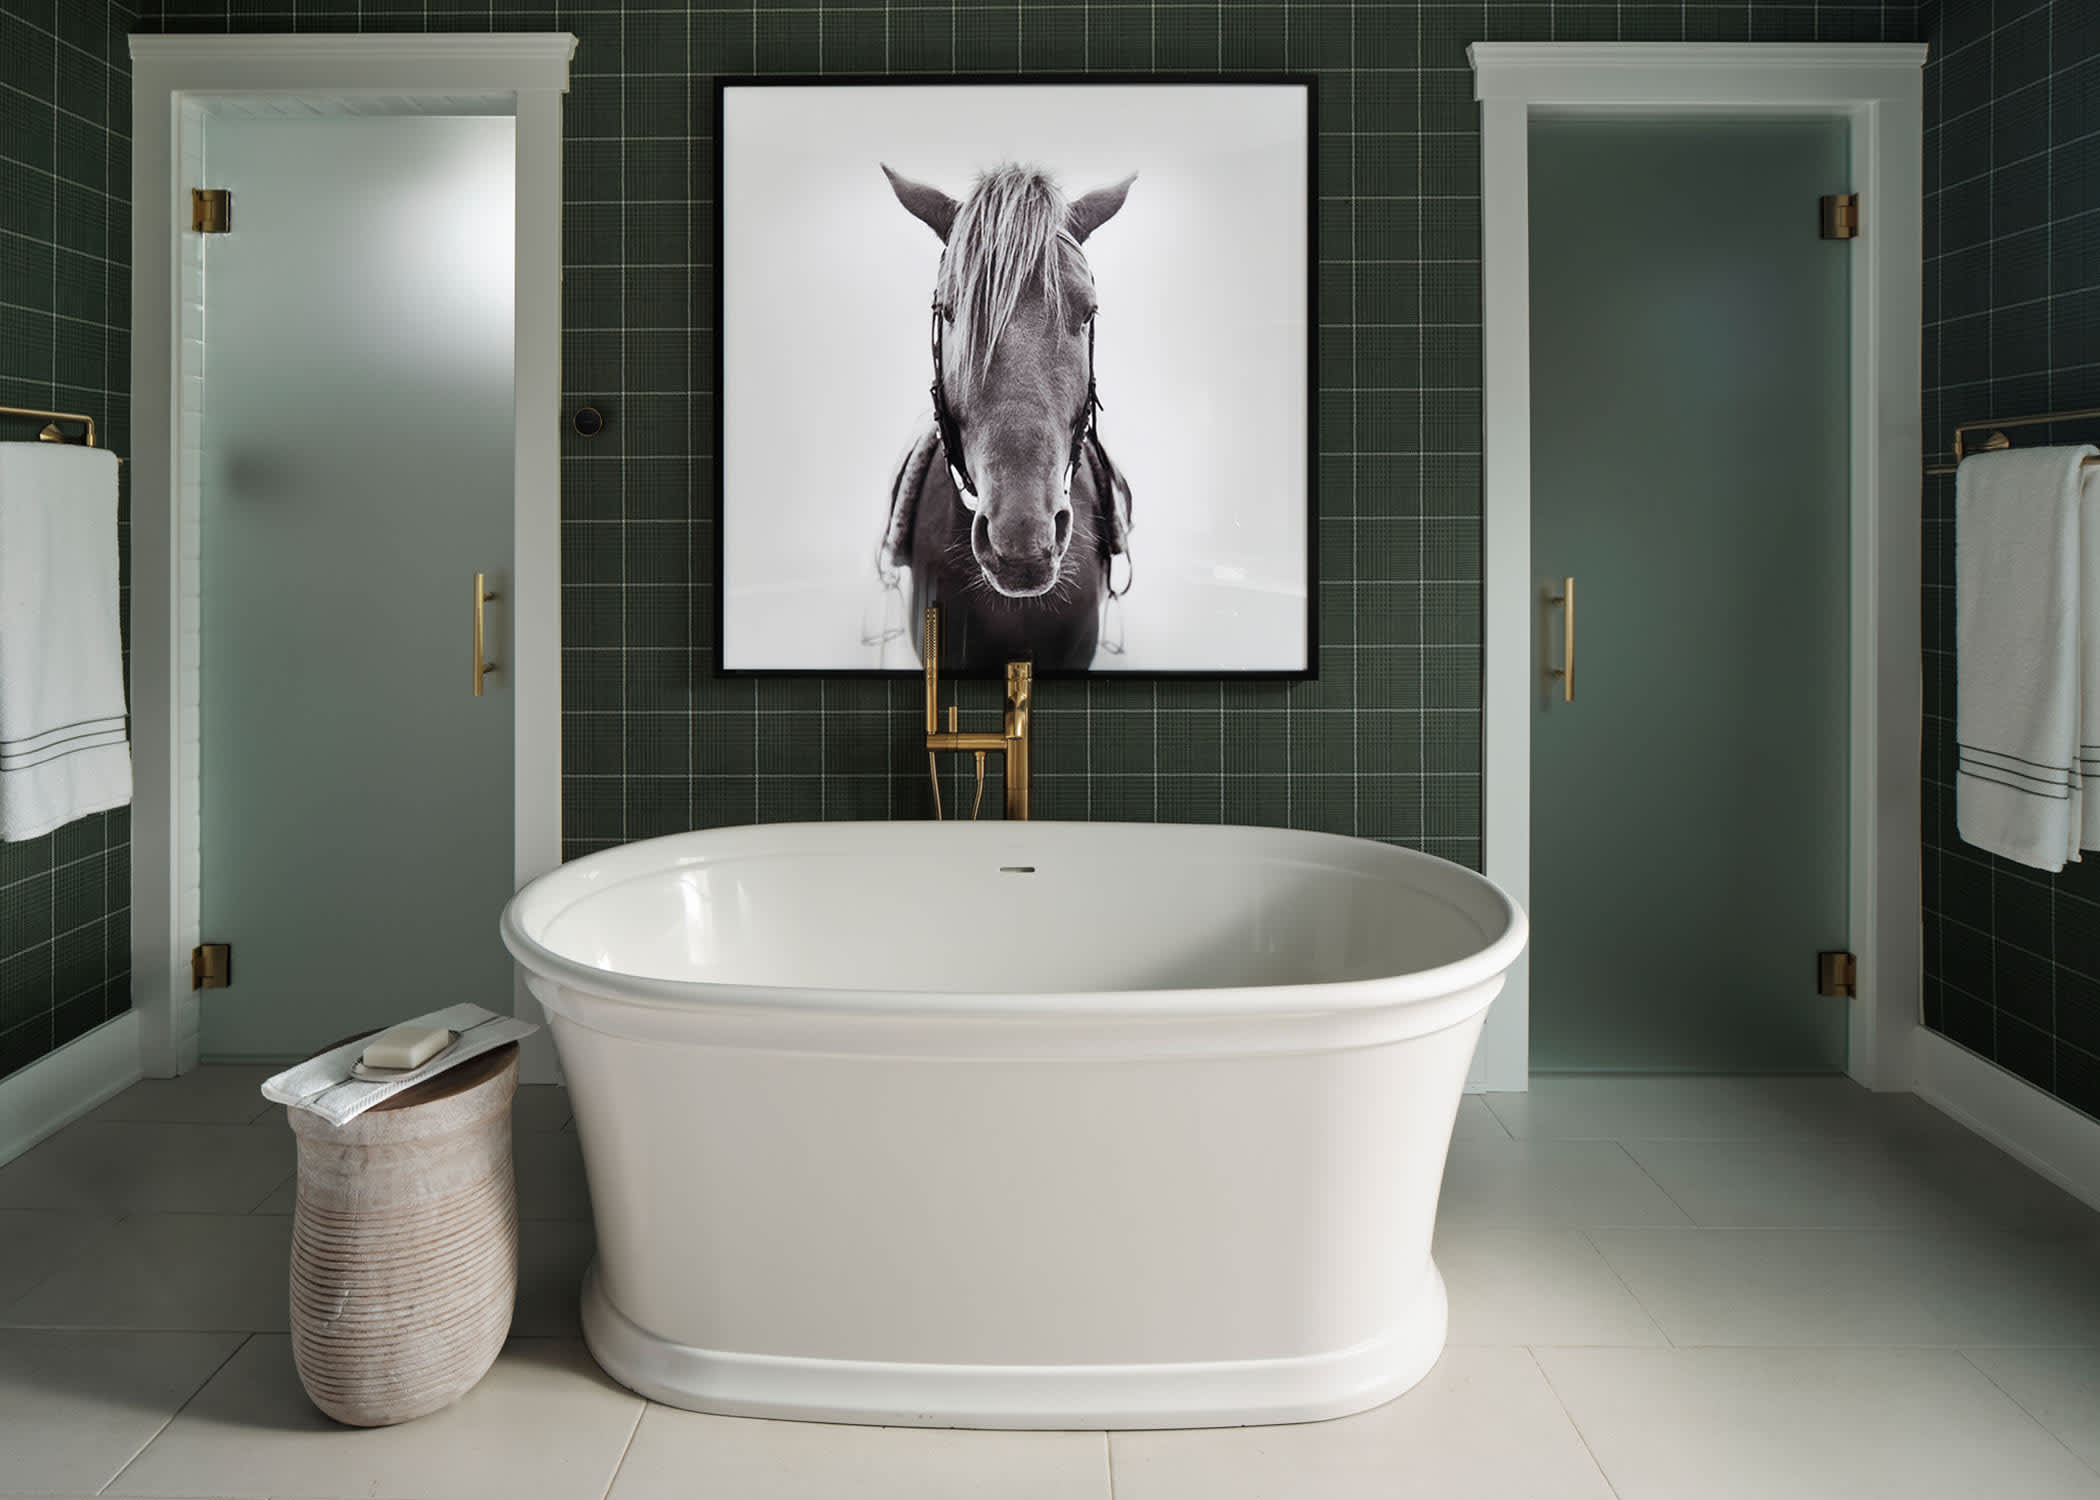 Regency Pearl Porcelain Tile Flooring in primary bathroom of HGTV 2023 Urban Oasis Home with white freestanding oval bathtub plus frosted glass doors on either side and equestrian artwork on wall above tub